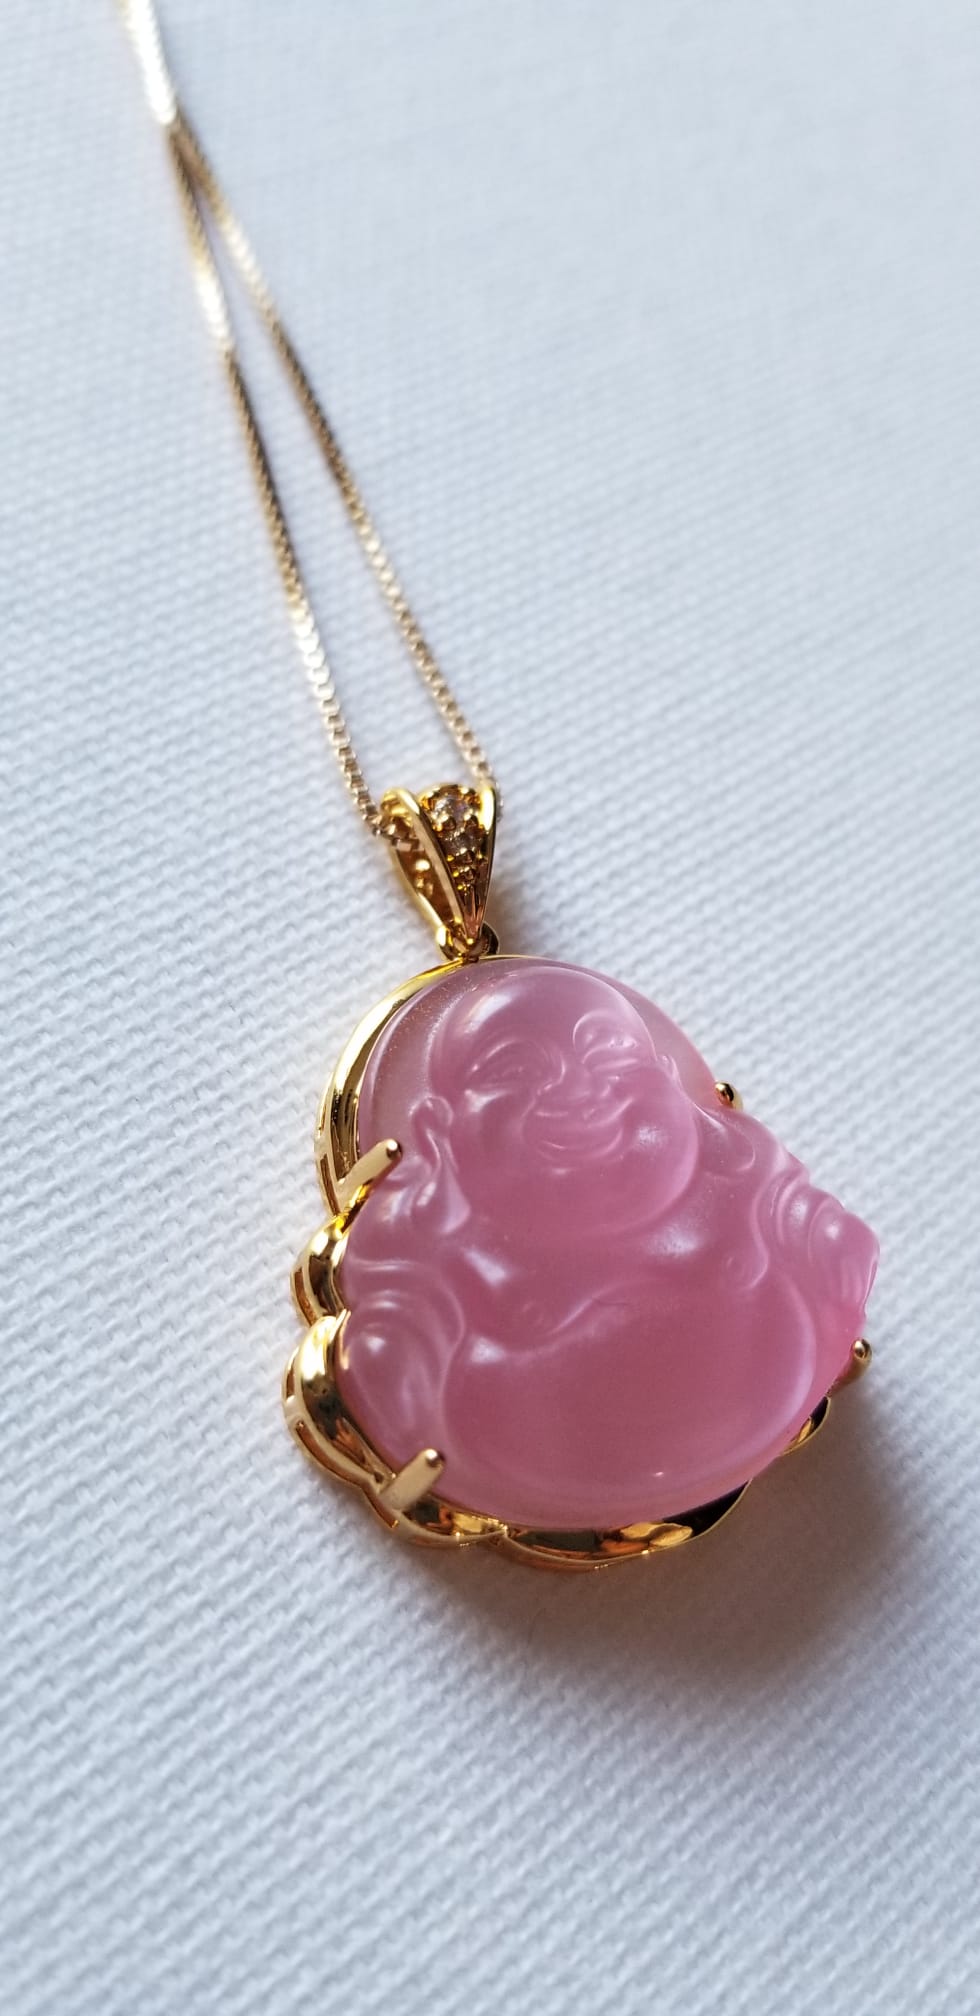 24k Gold filled Buddha Pendant Protection Necklace